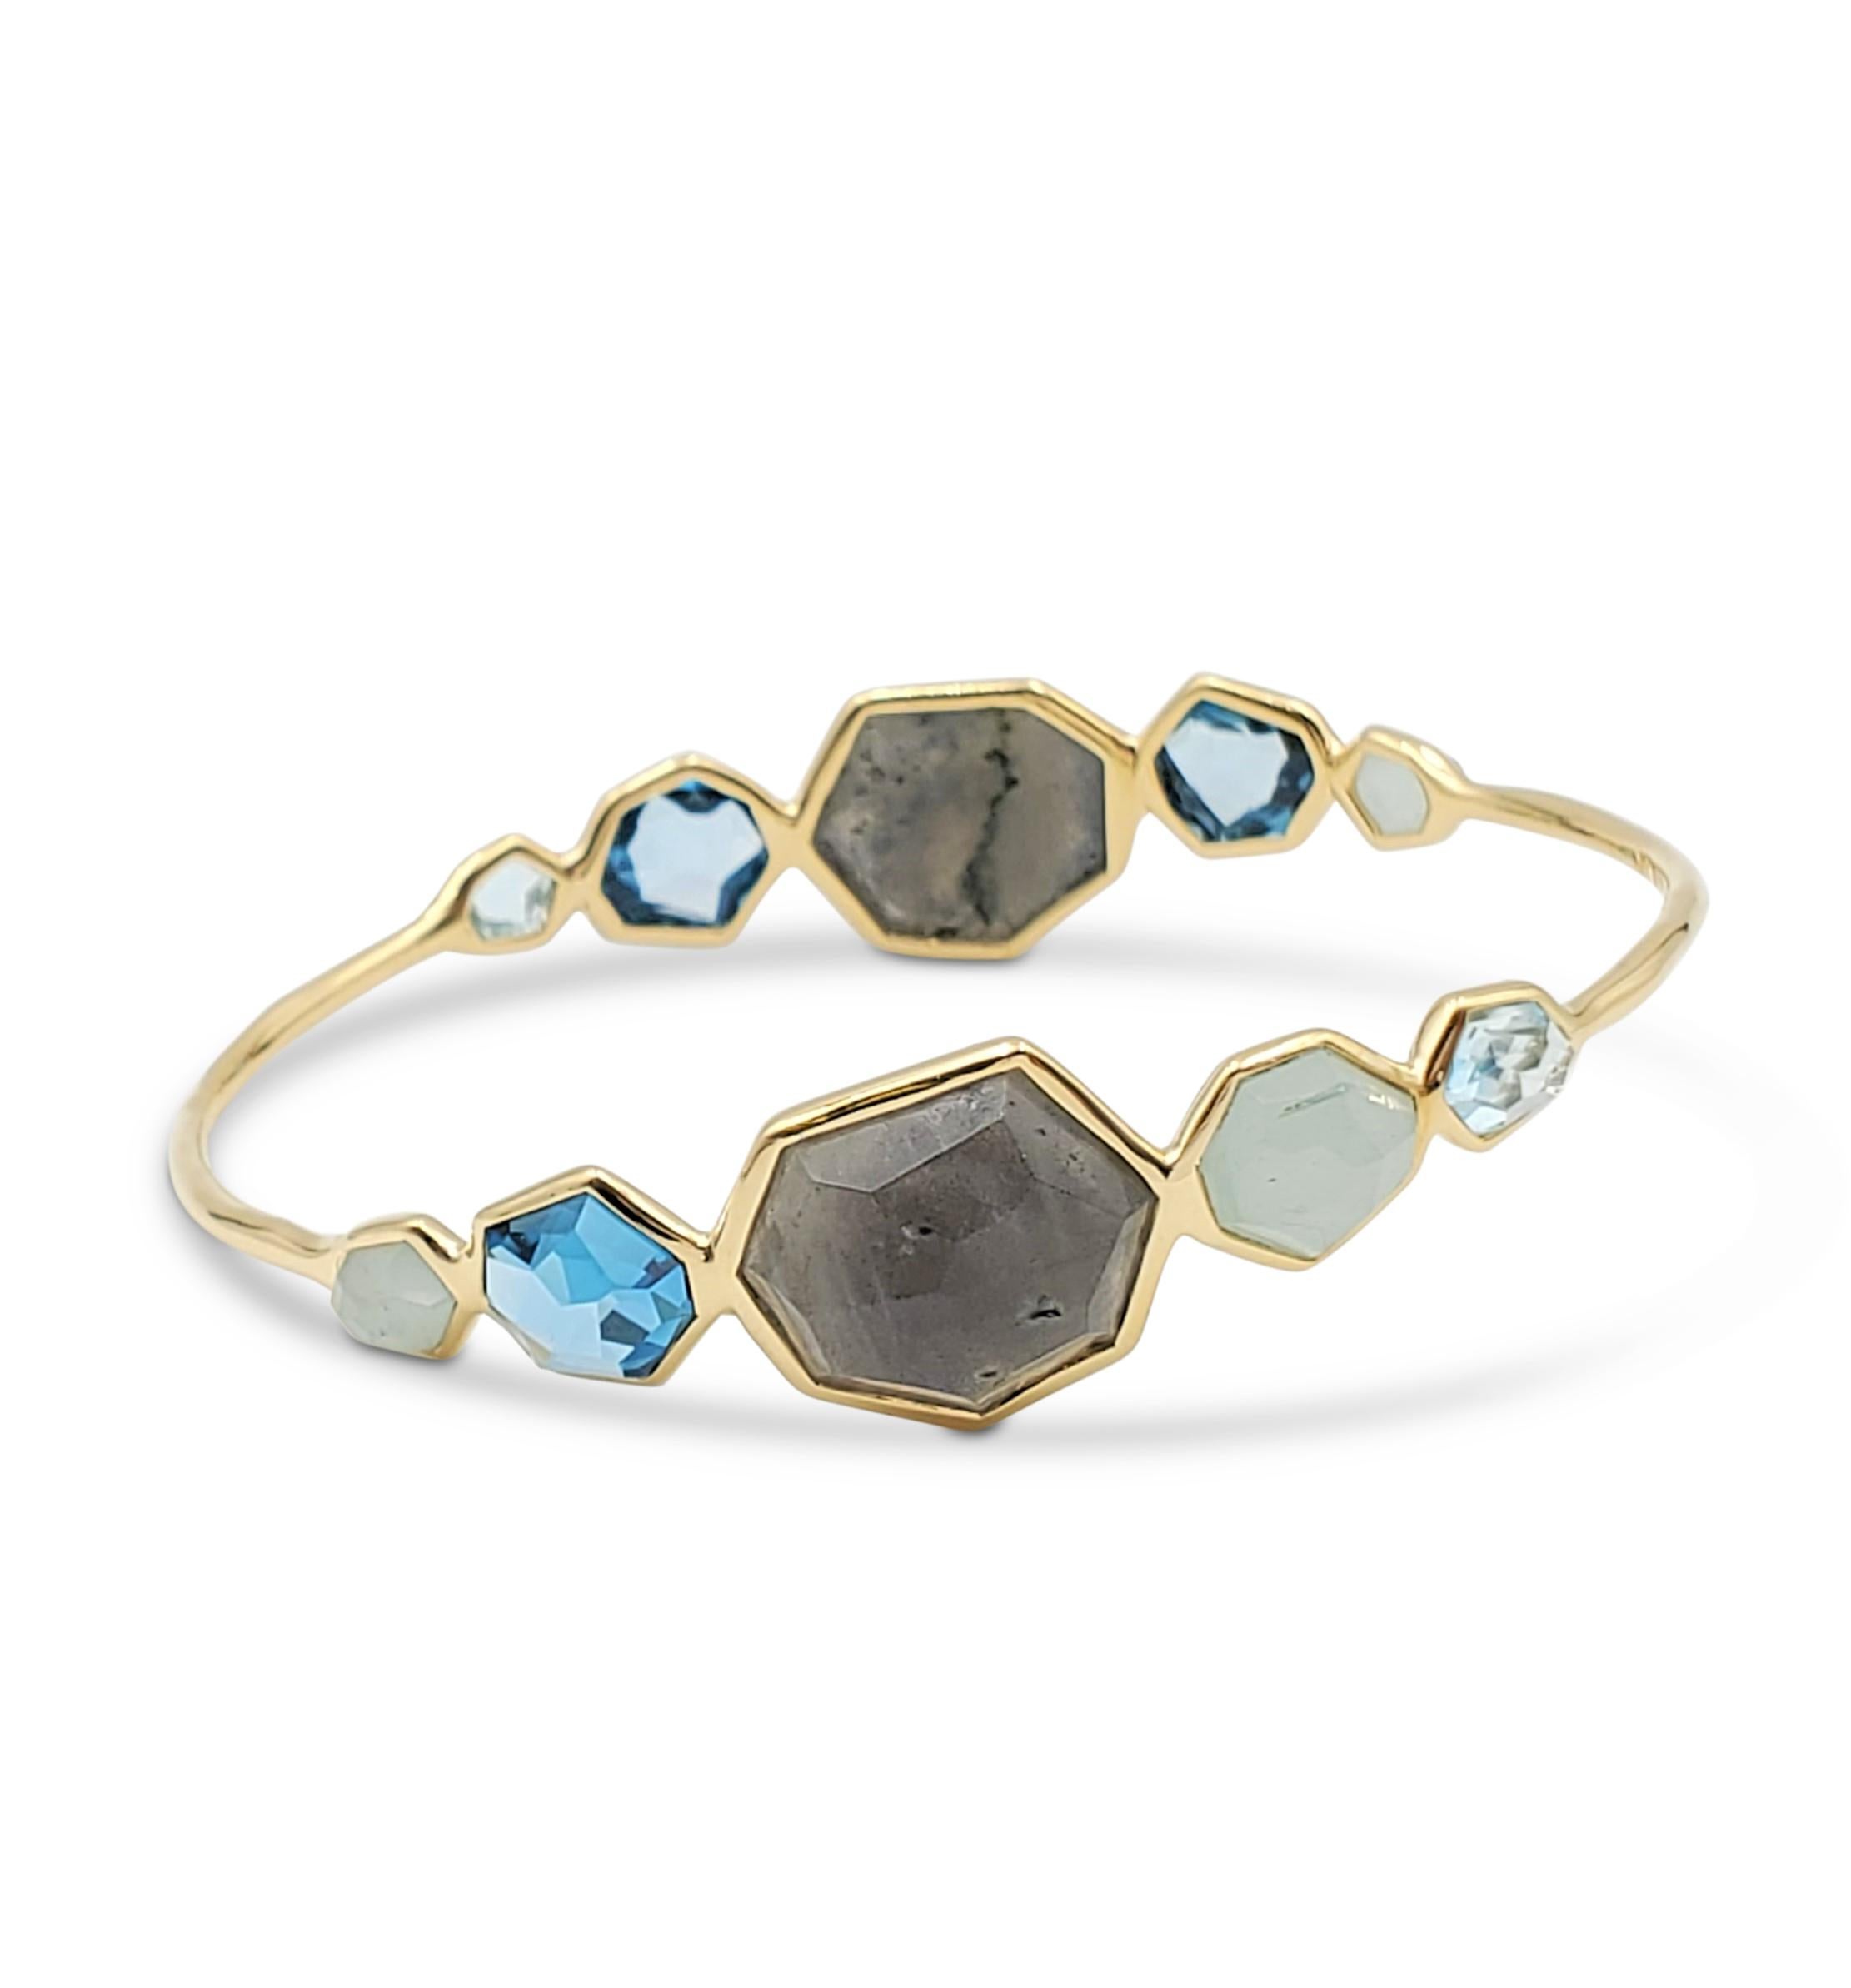 Authentic Ippolita 'Rock Candy' bangle crafted in 18 karat yellow gold displaying a mixture of blue gemstones in a variety of shapes. Signed Ippolita, 18K. The bangle is not presented with the original box or papers. CIRCA 2010s.

Bracelet Inside